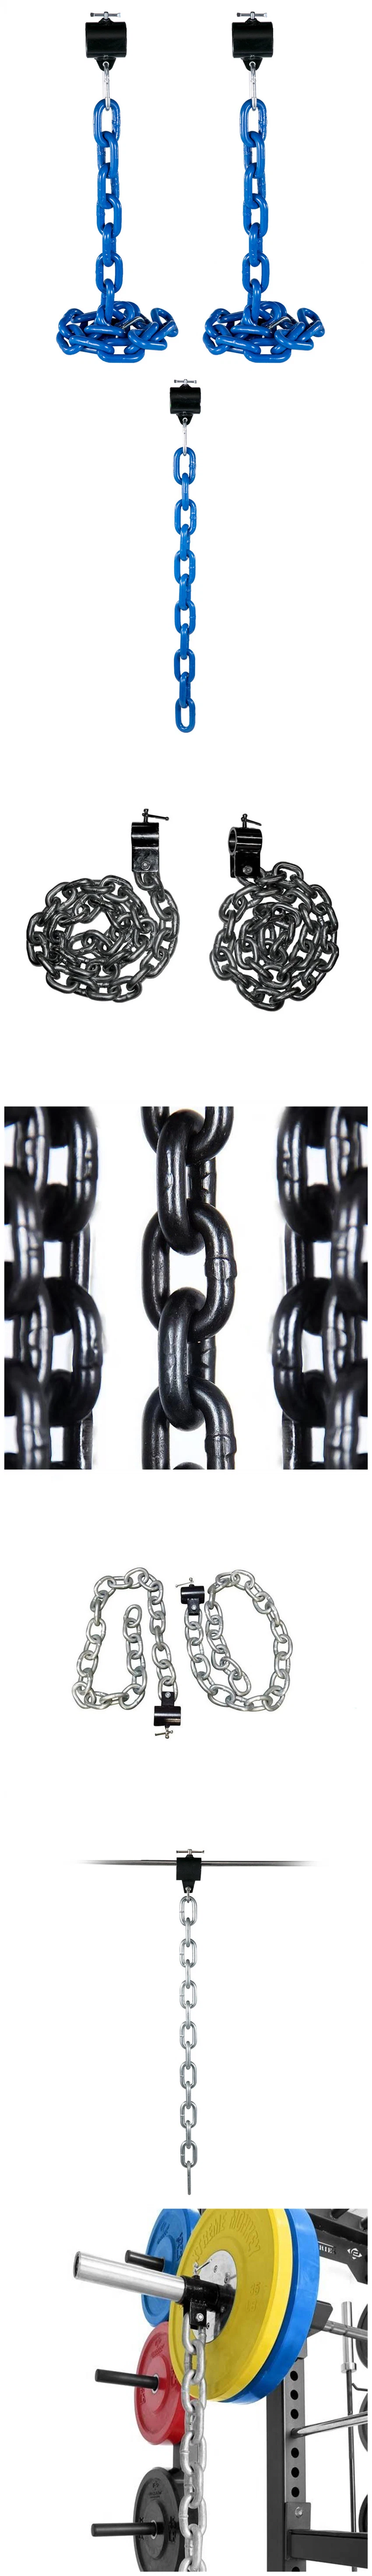 Weight Lifting Chains Weight Lifting Chain Bench Press Chains with Collars 5.2 FT Ob Pic